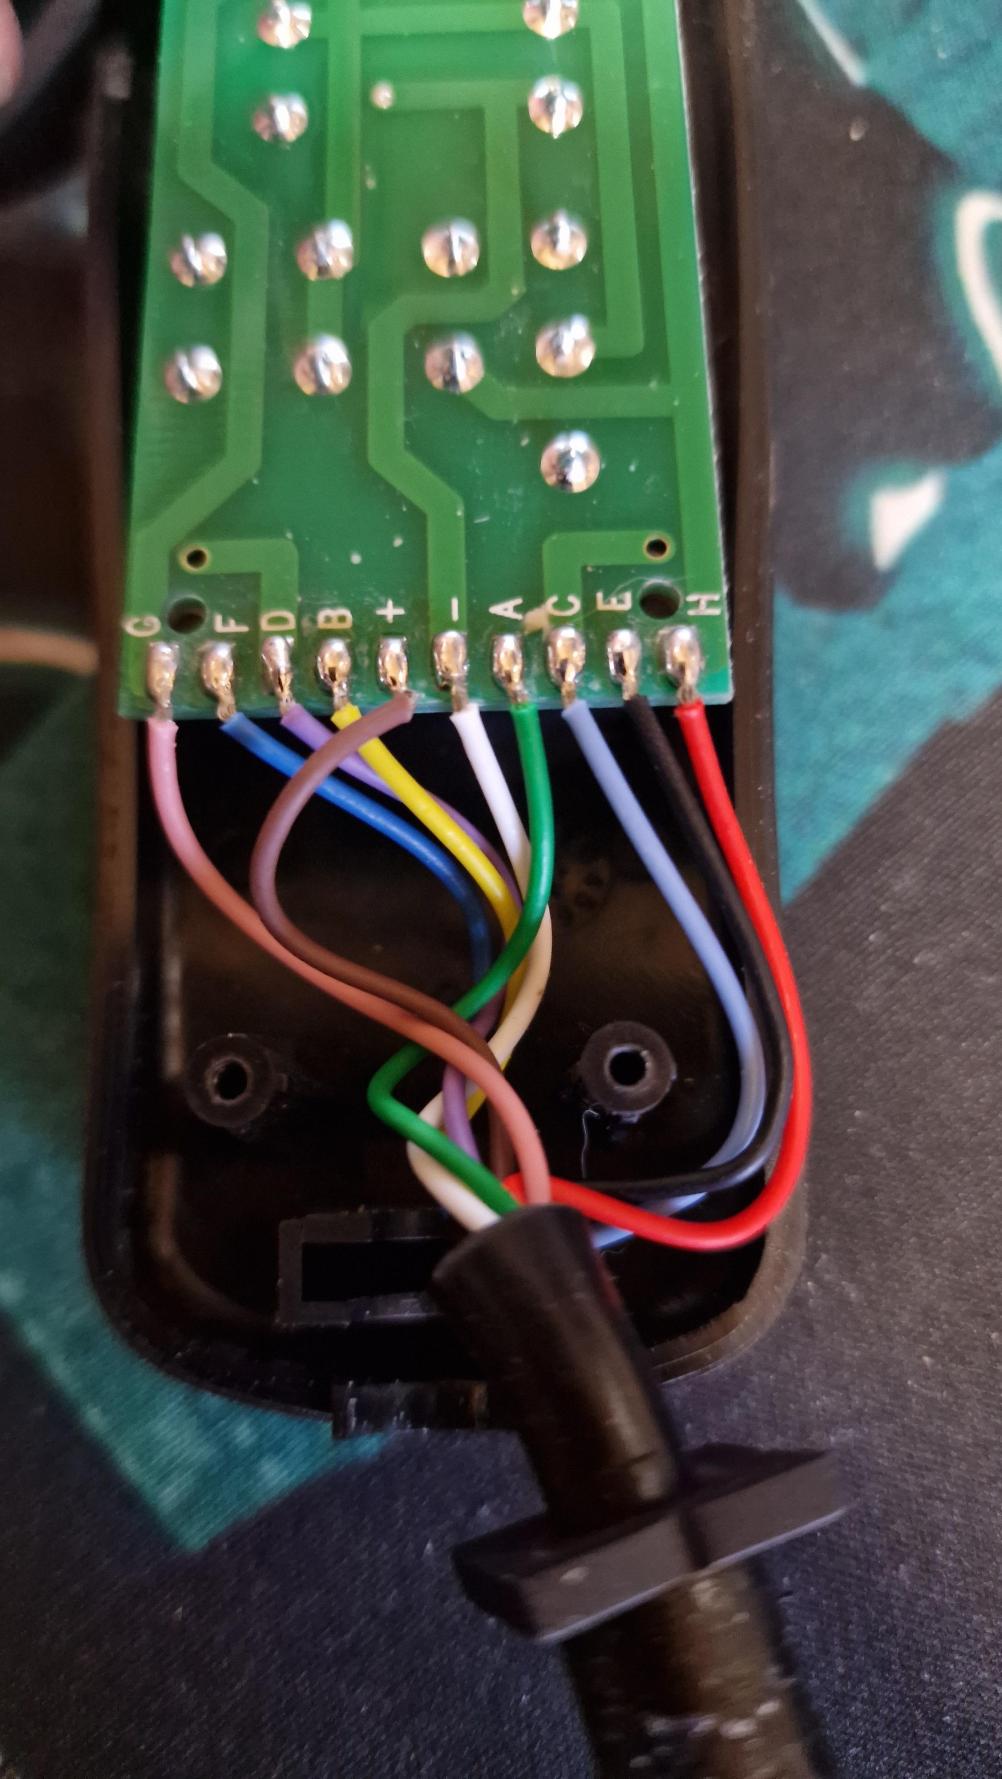 Wired   Remote Control - Inside Image